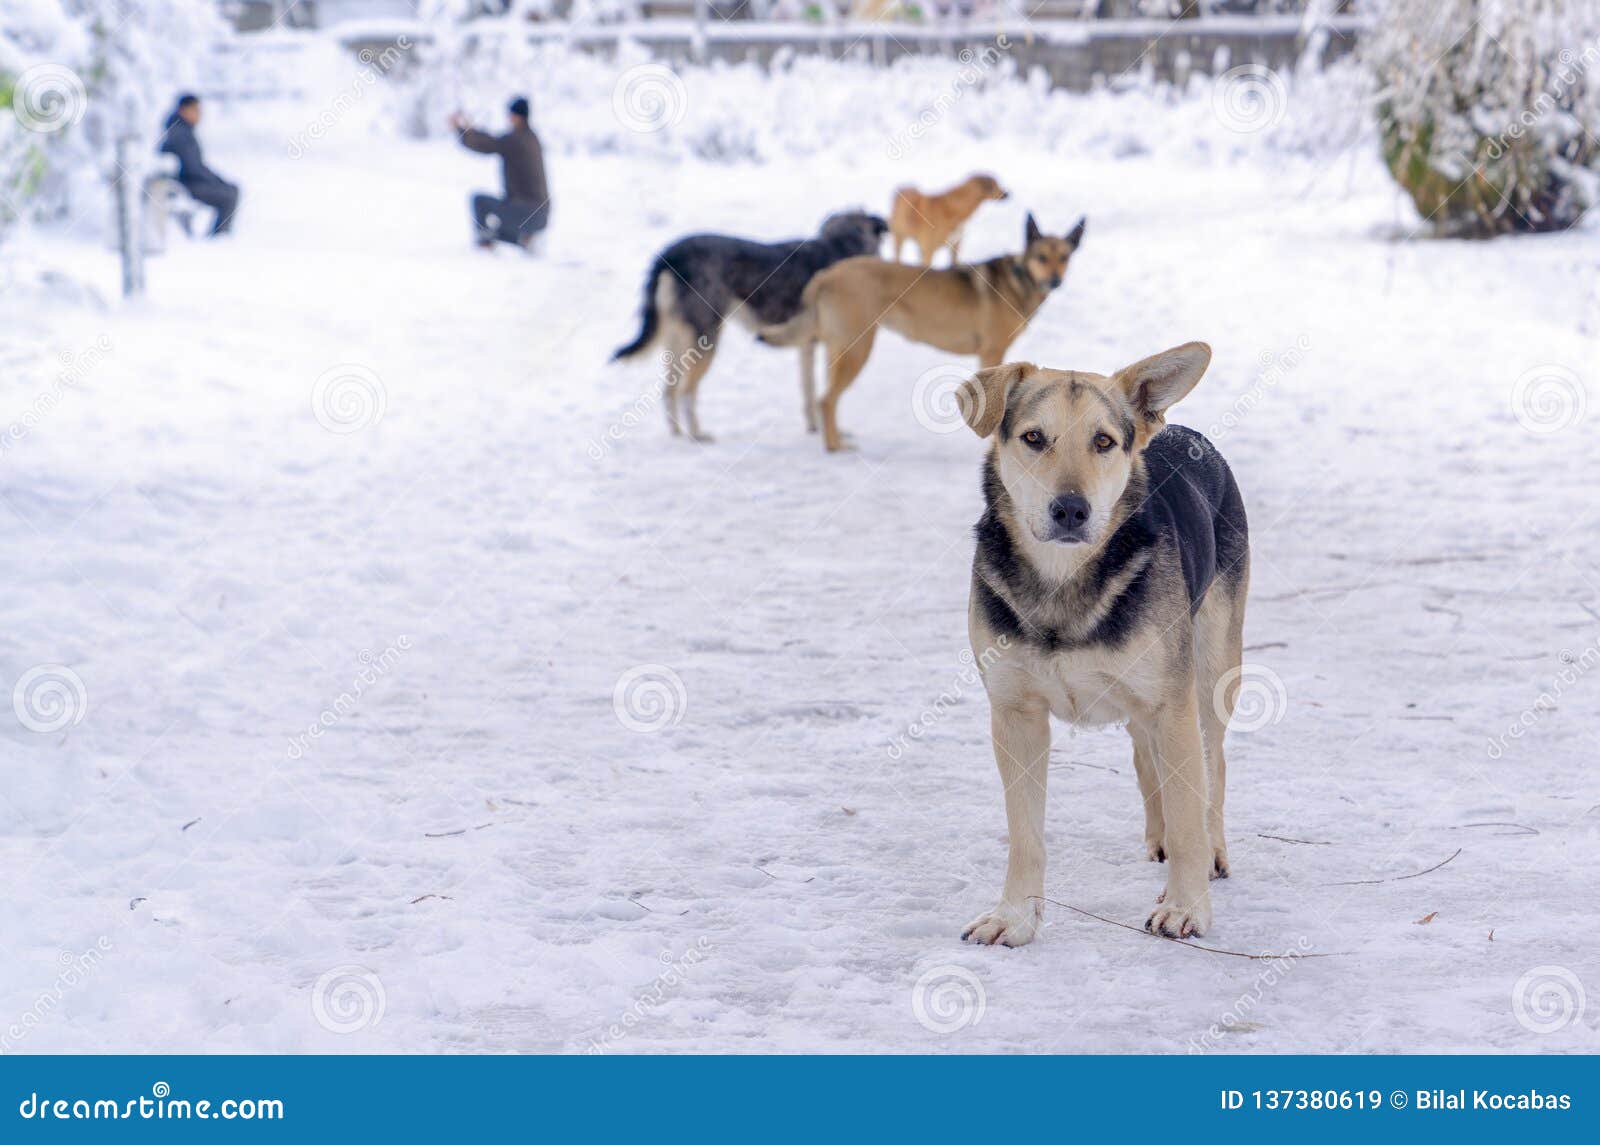 four stray dogs in winter and human take photos in background. concept of everybody loves to have snow picture